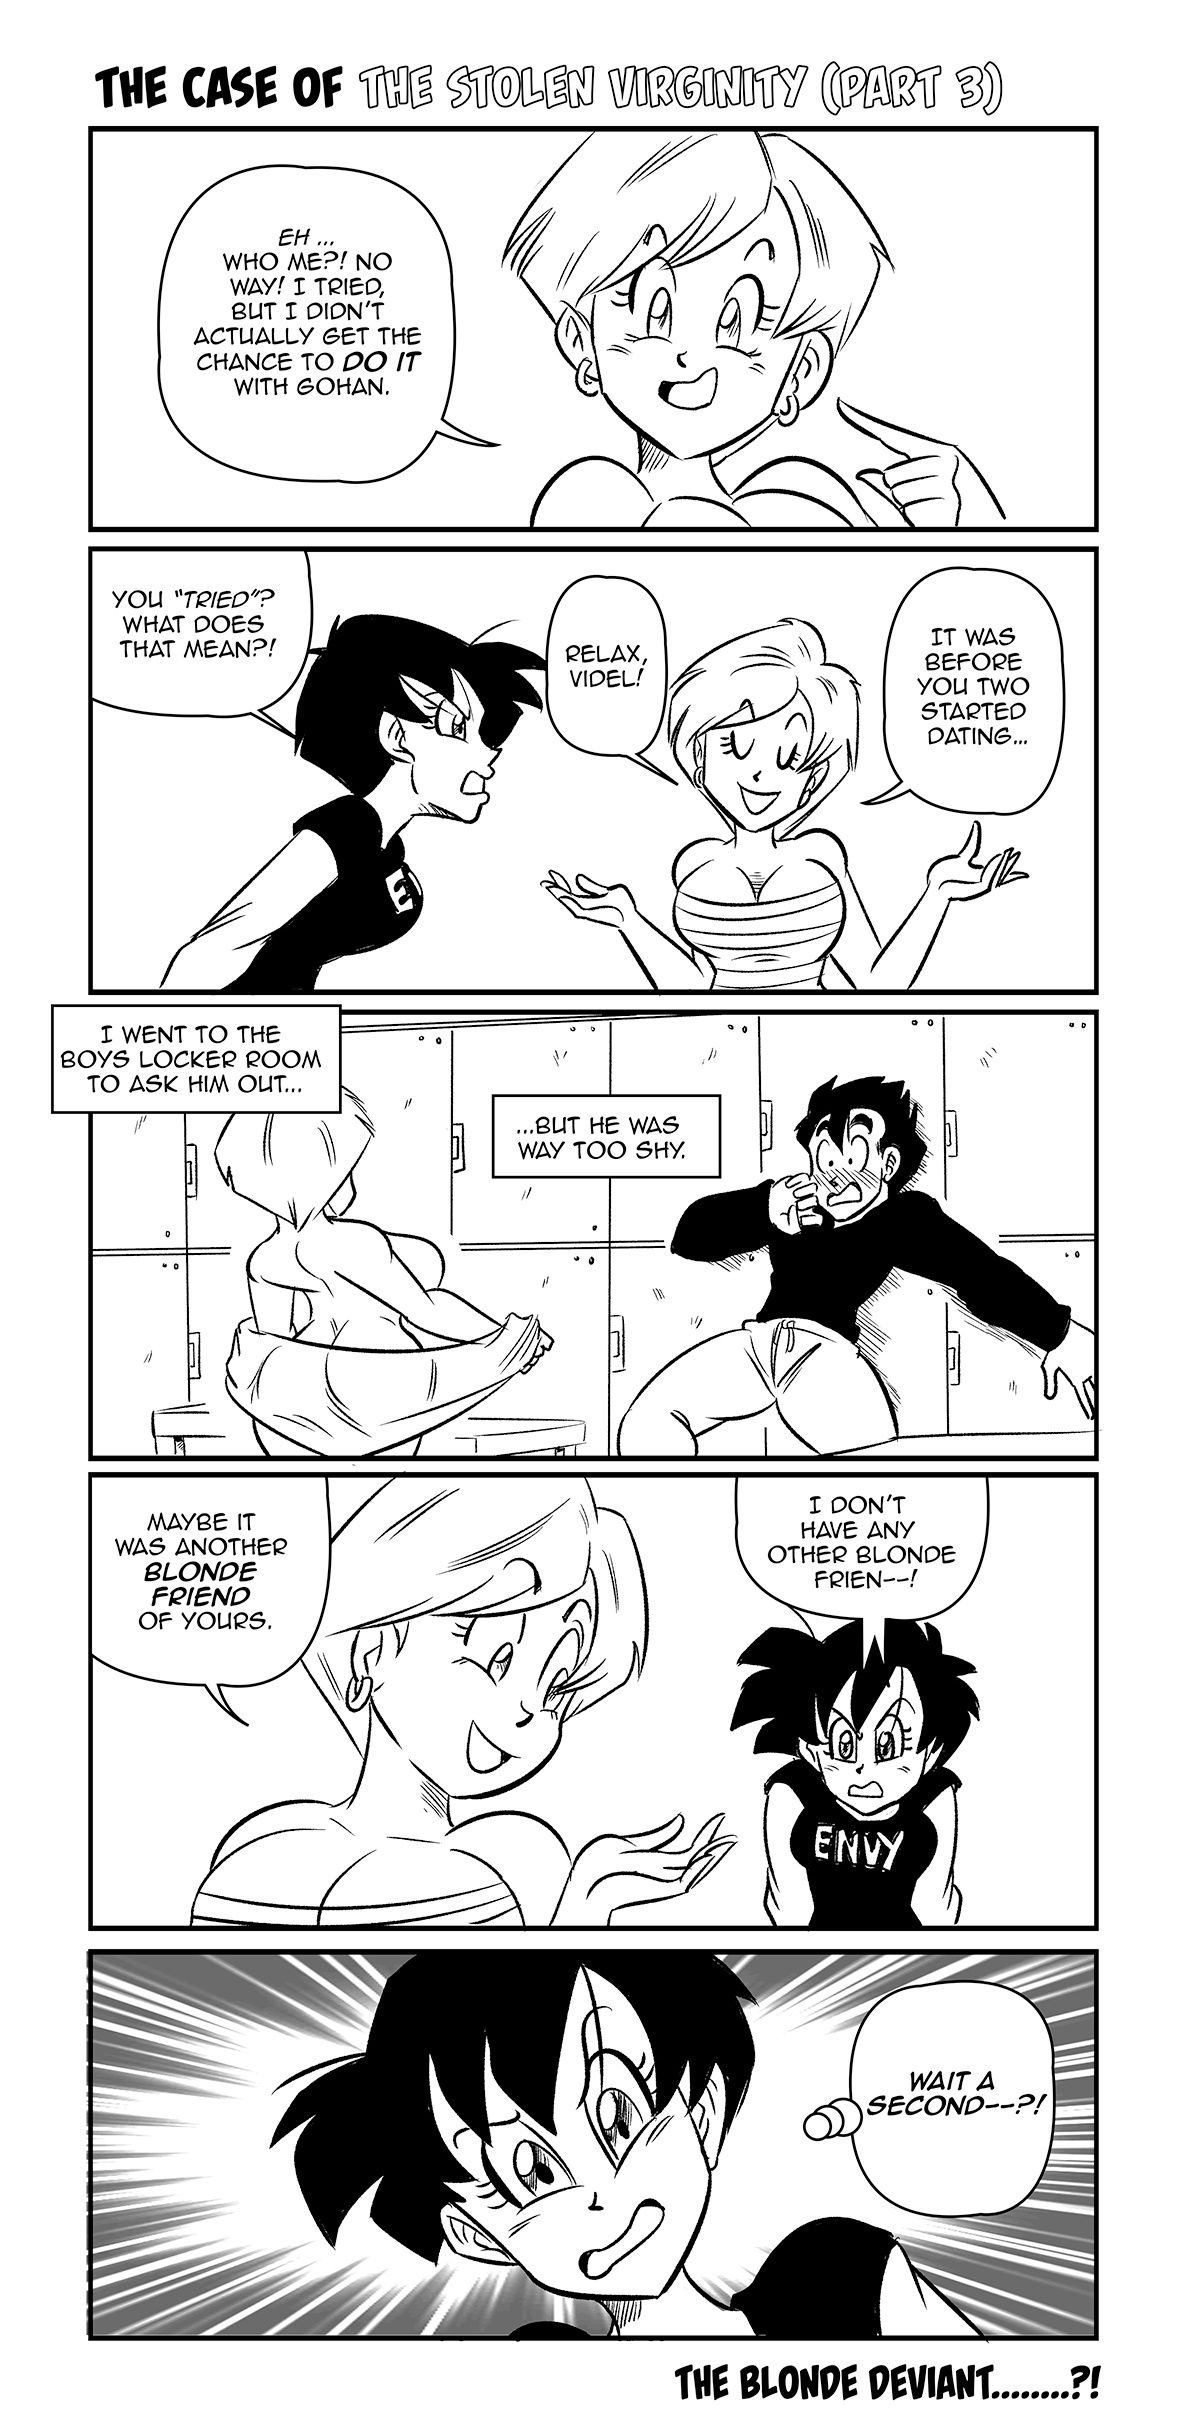 [FunsexyDB] The Stolen Virginity (Dragon Ball Z) [Ongoing] 5